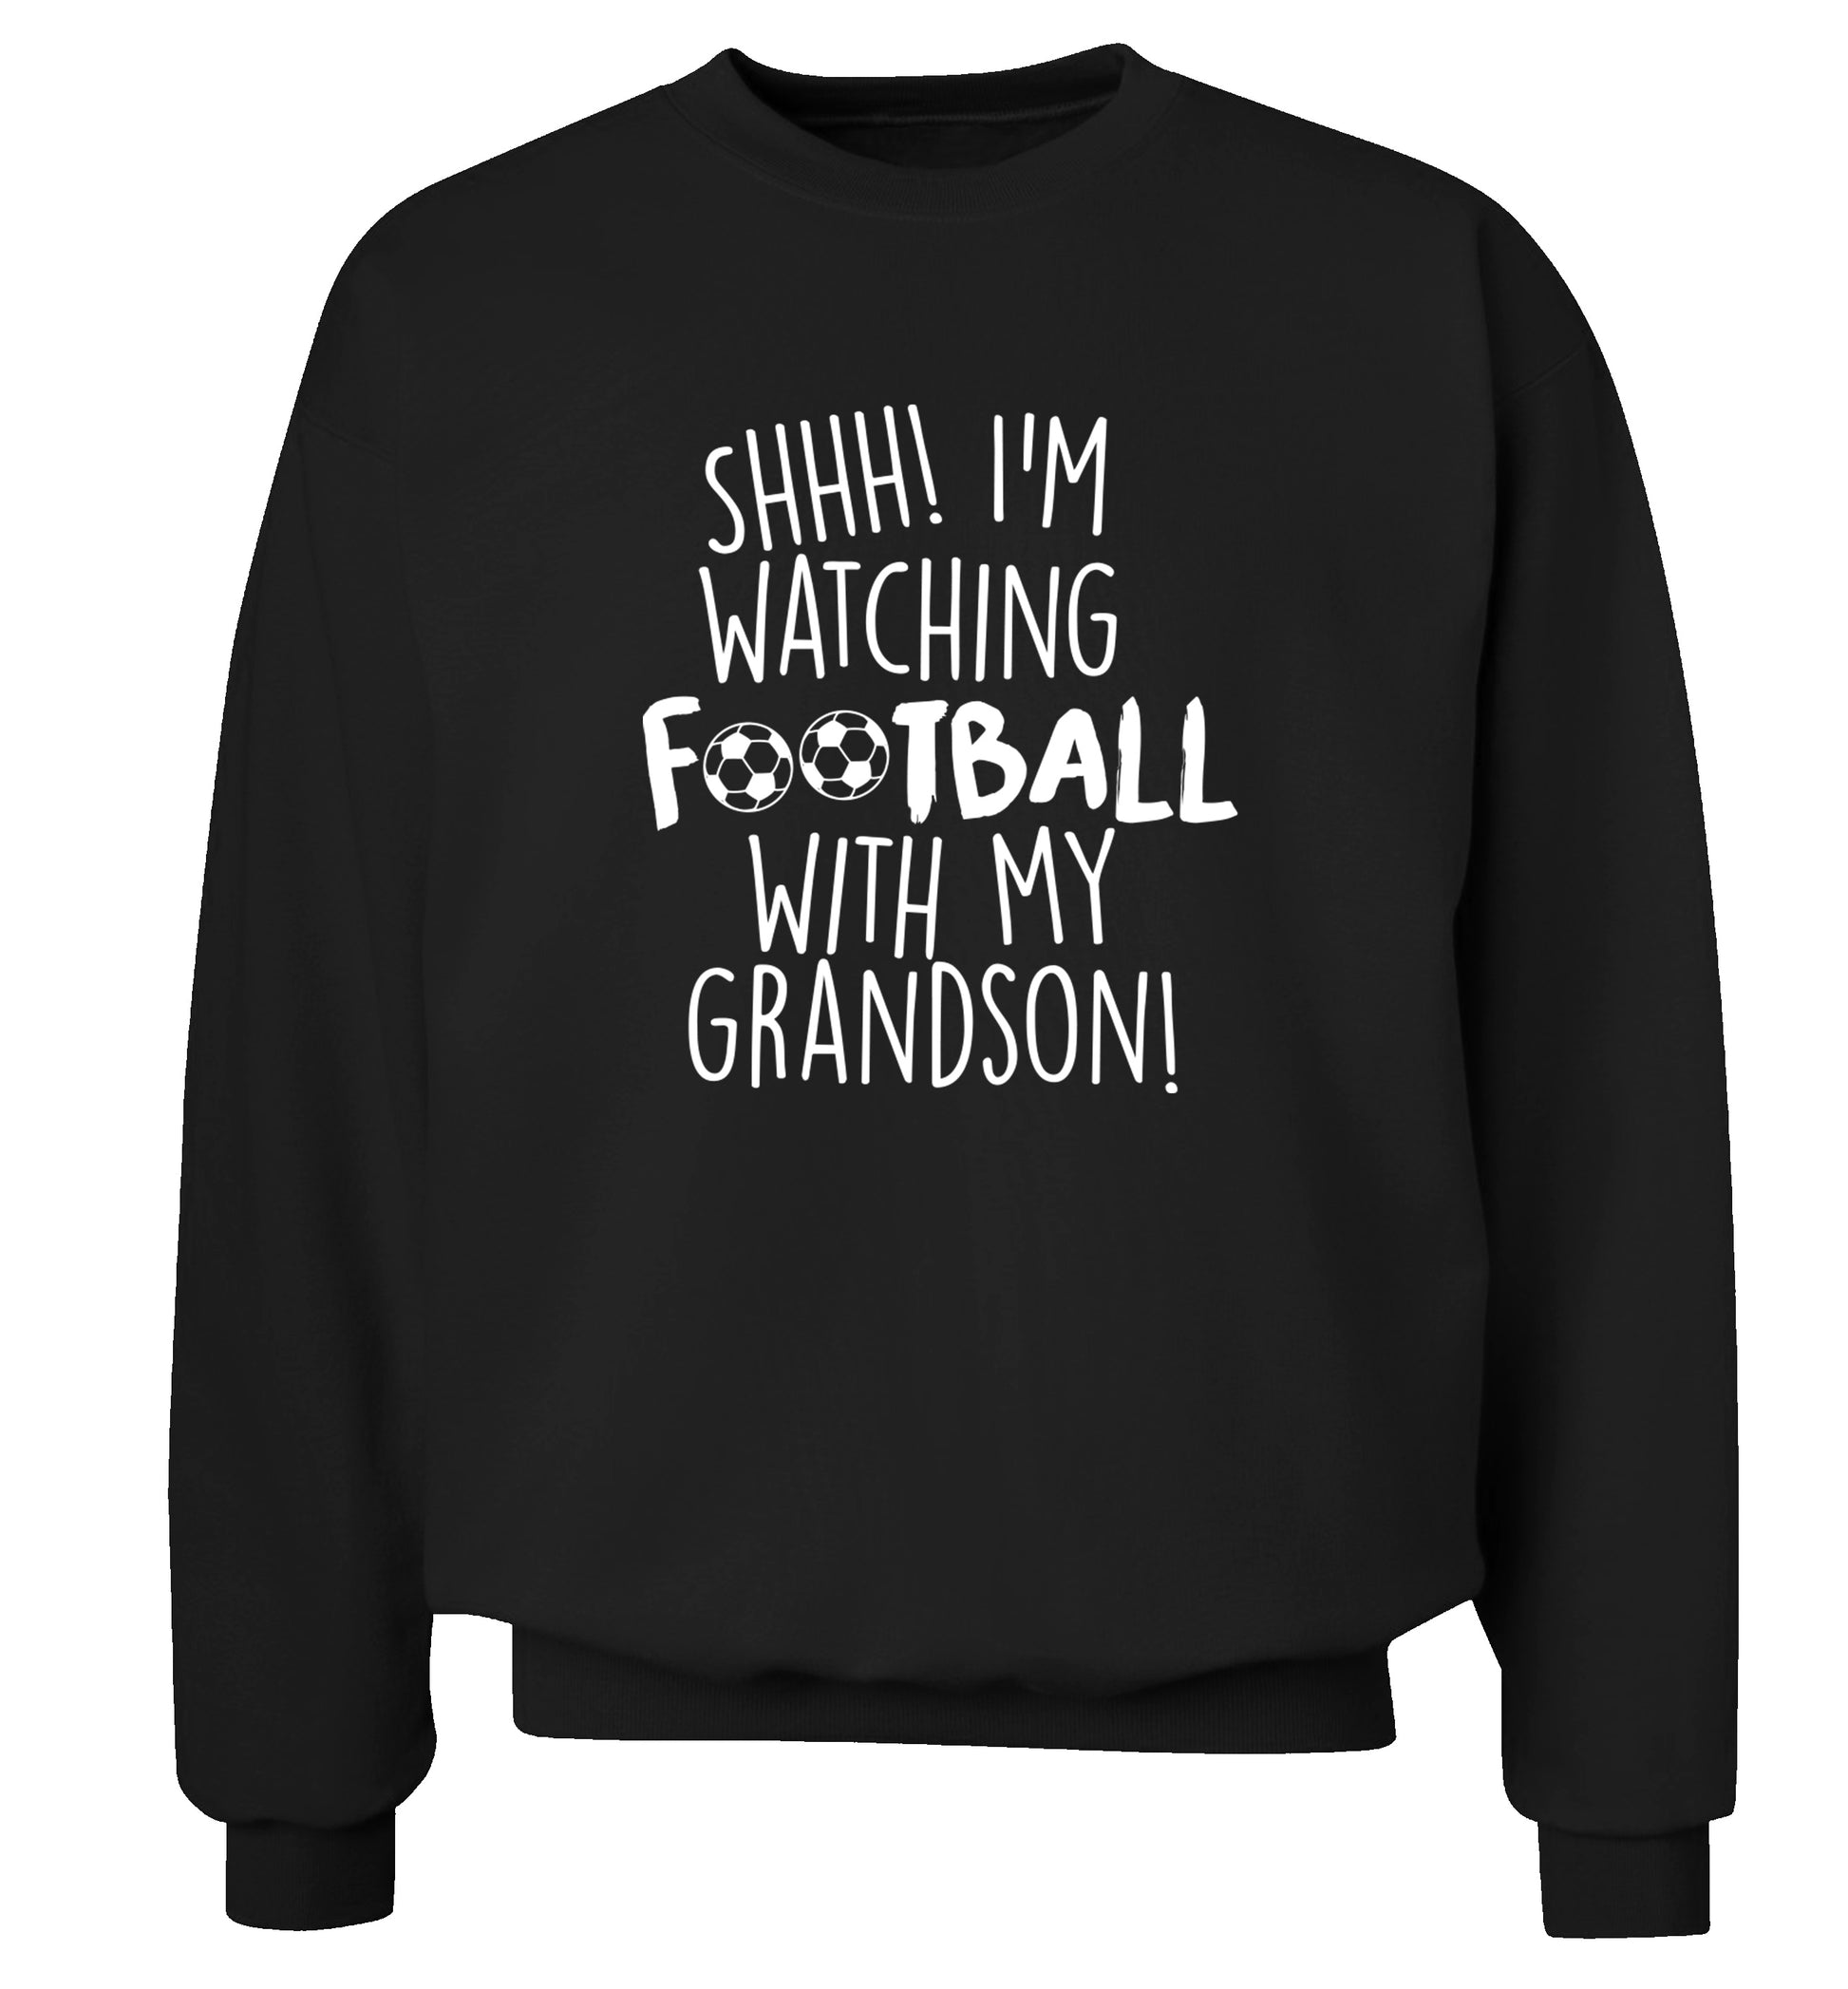 Shhh I'm watching football with my grandson Adult's unisexblack Sweater 2XL